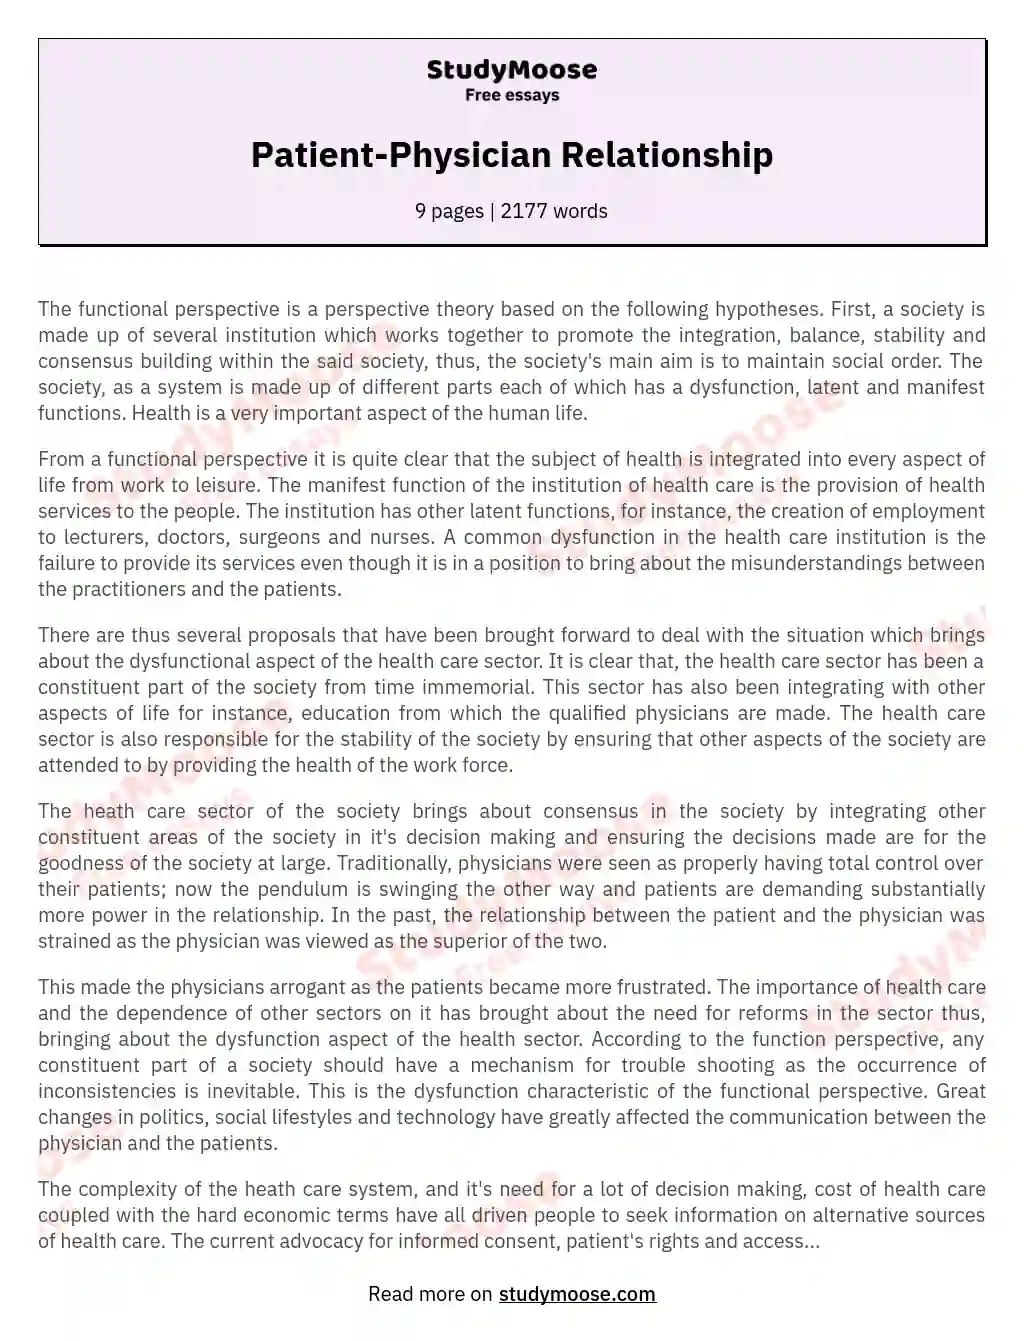 Patient-Physician Relationship essay